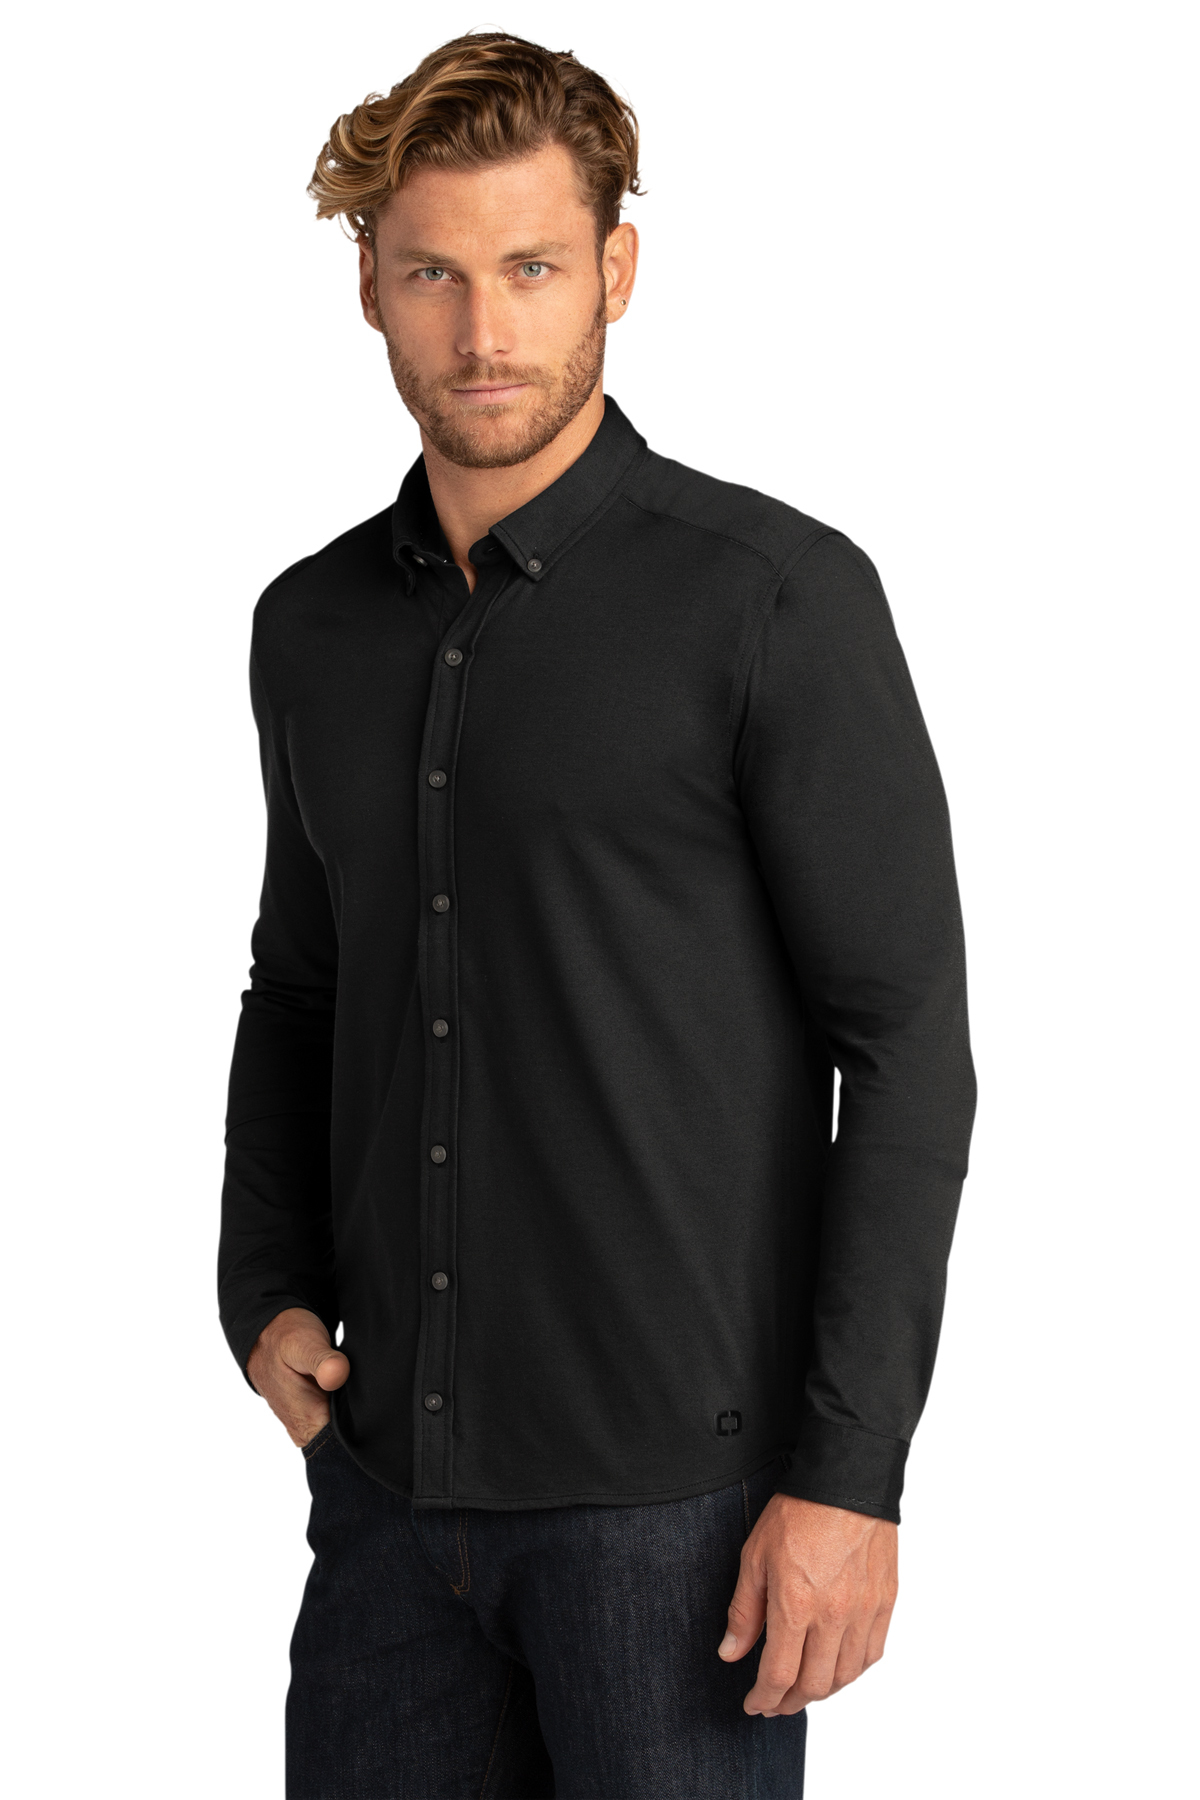 OGIO Code Stretch Long Sleeve Button-Up | Product | Company Casuals